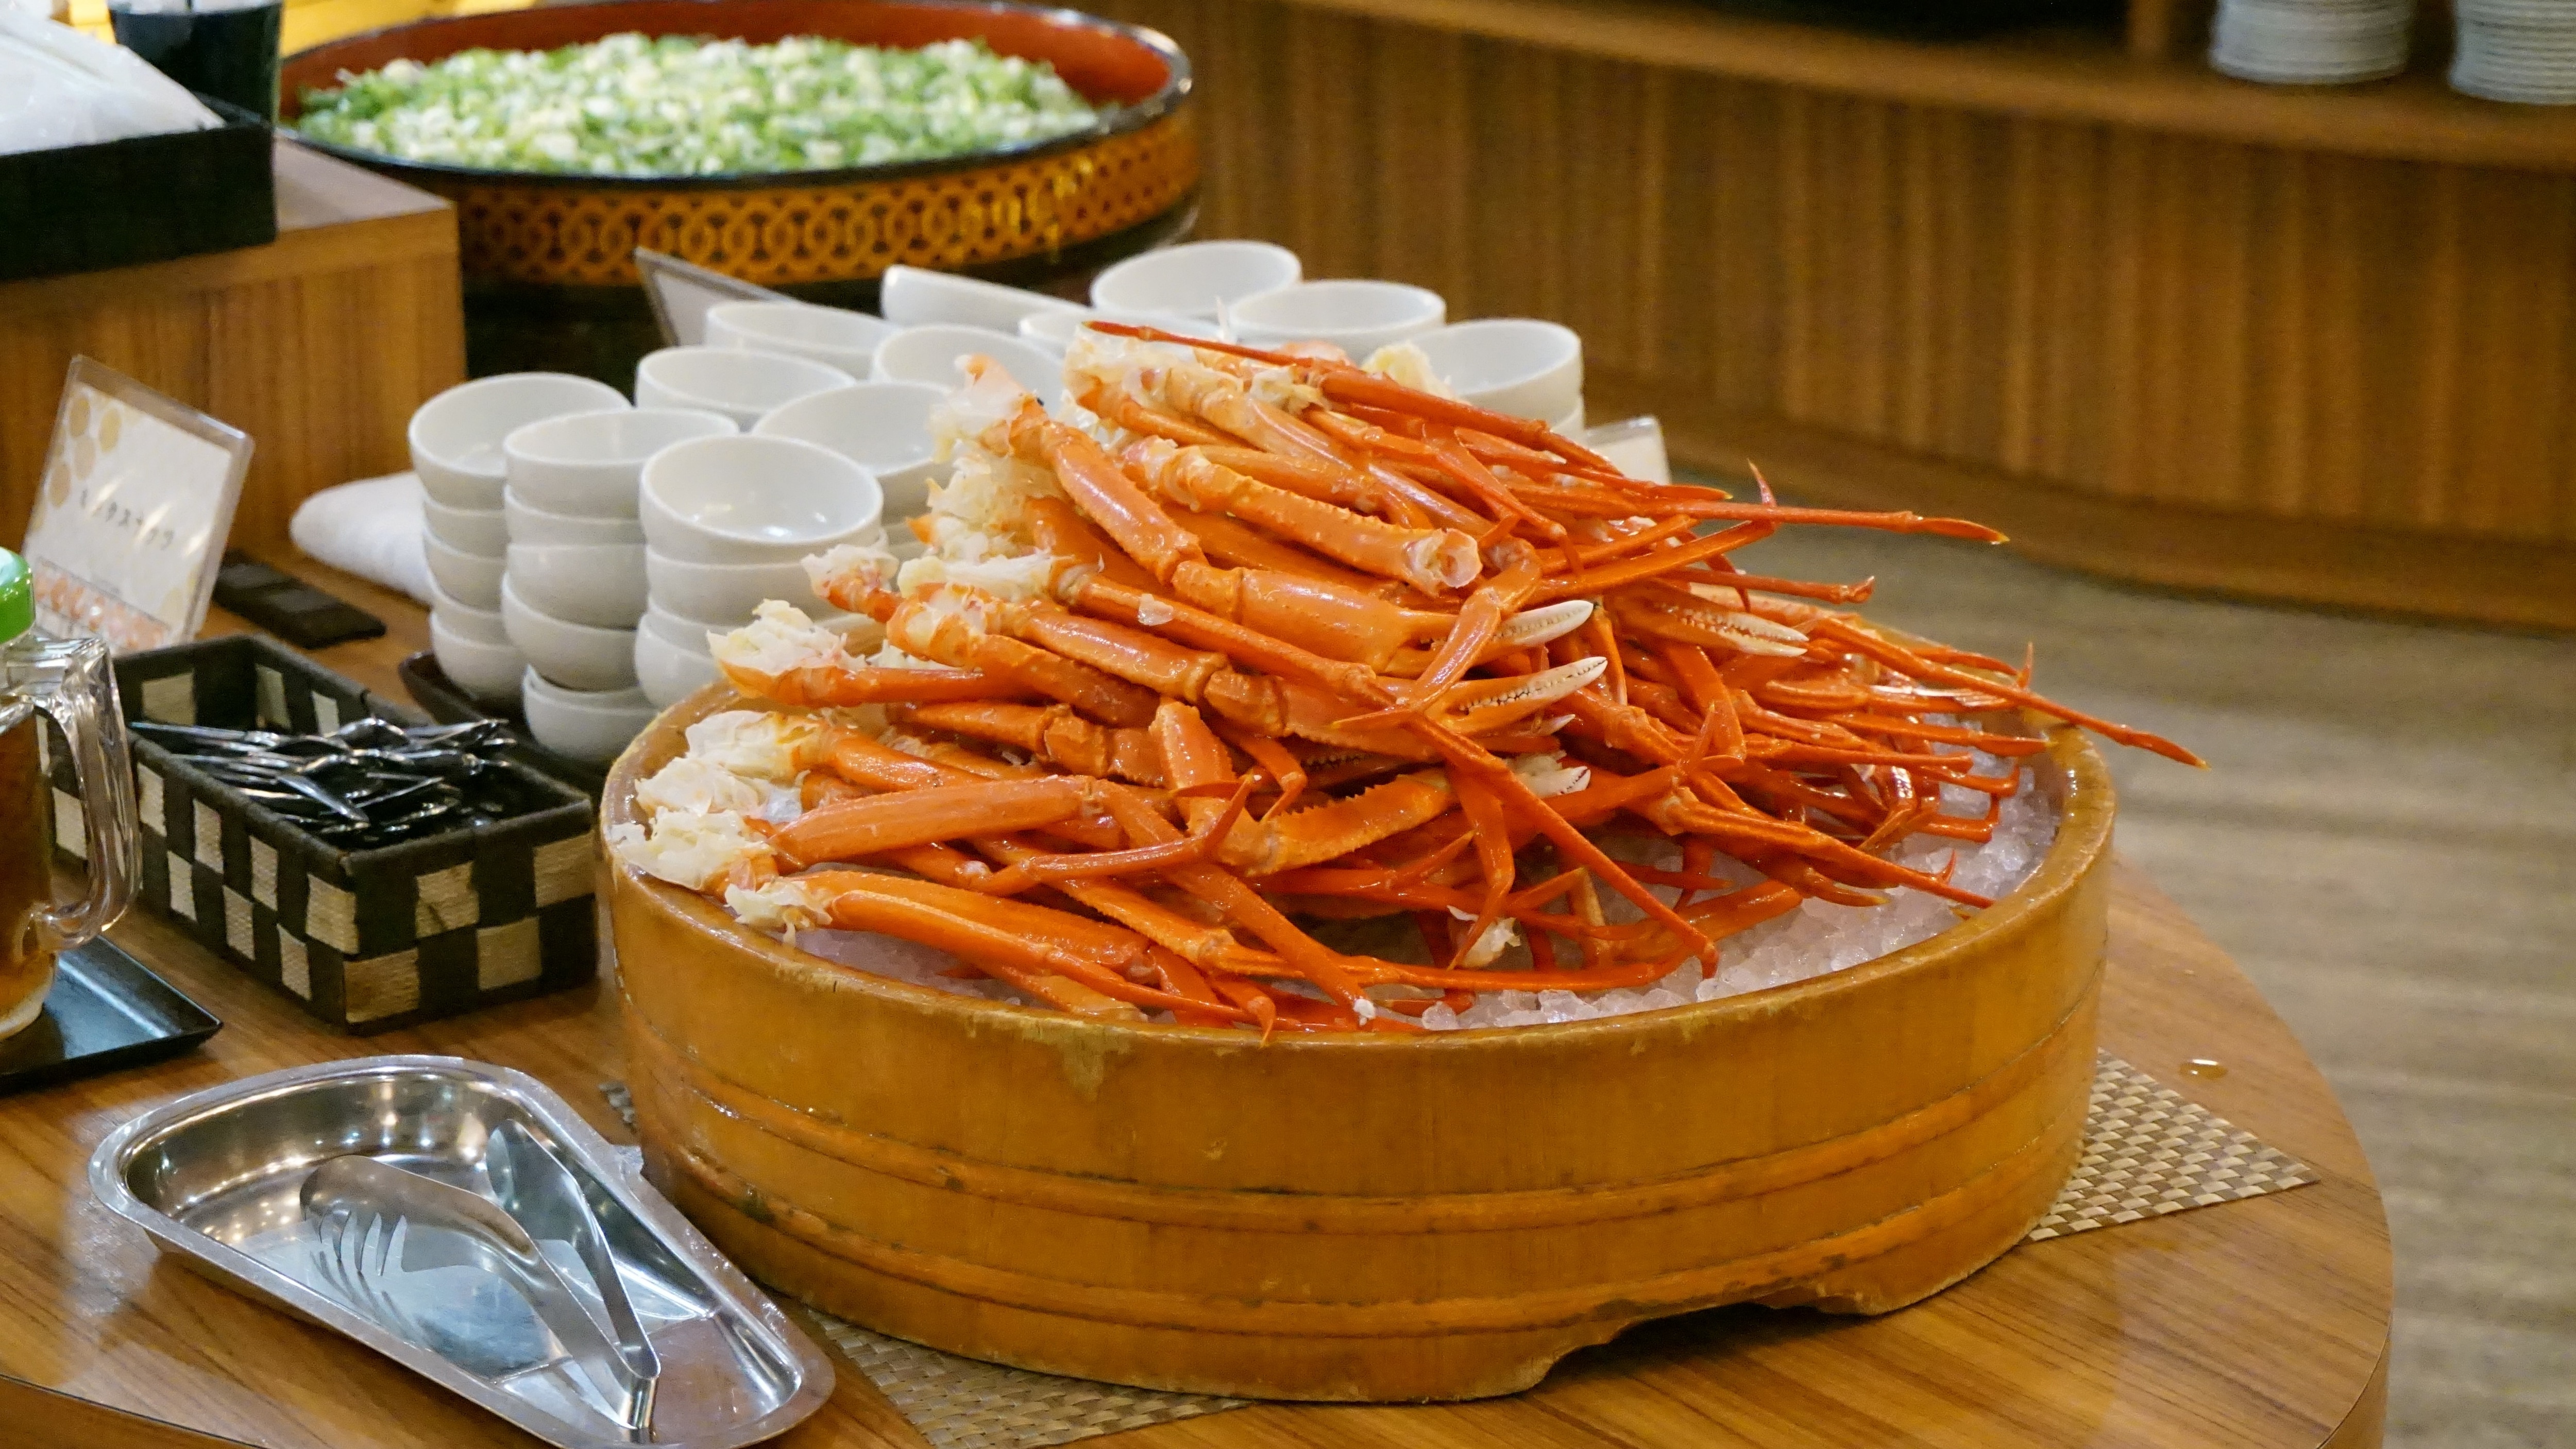 [Supper buffet] All-you-can-eat crab legs